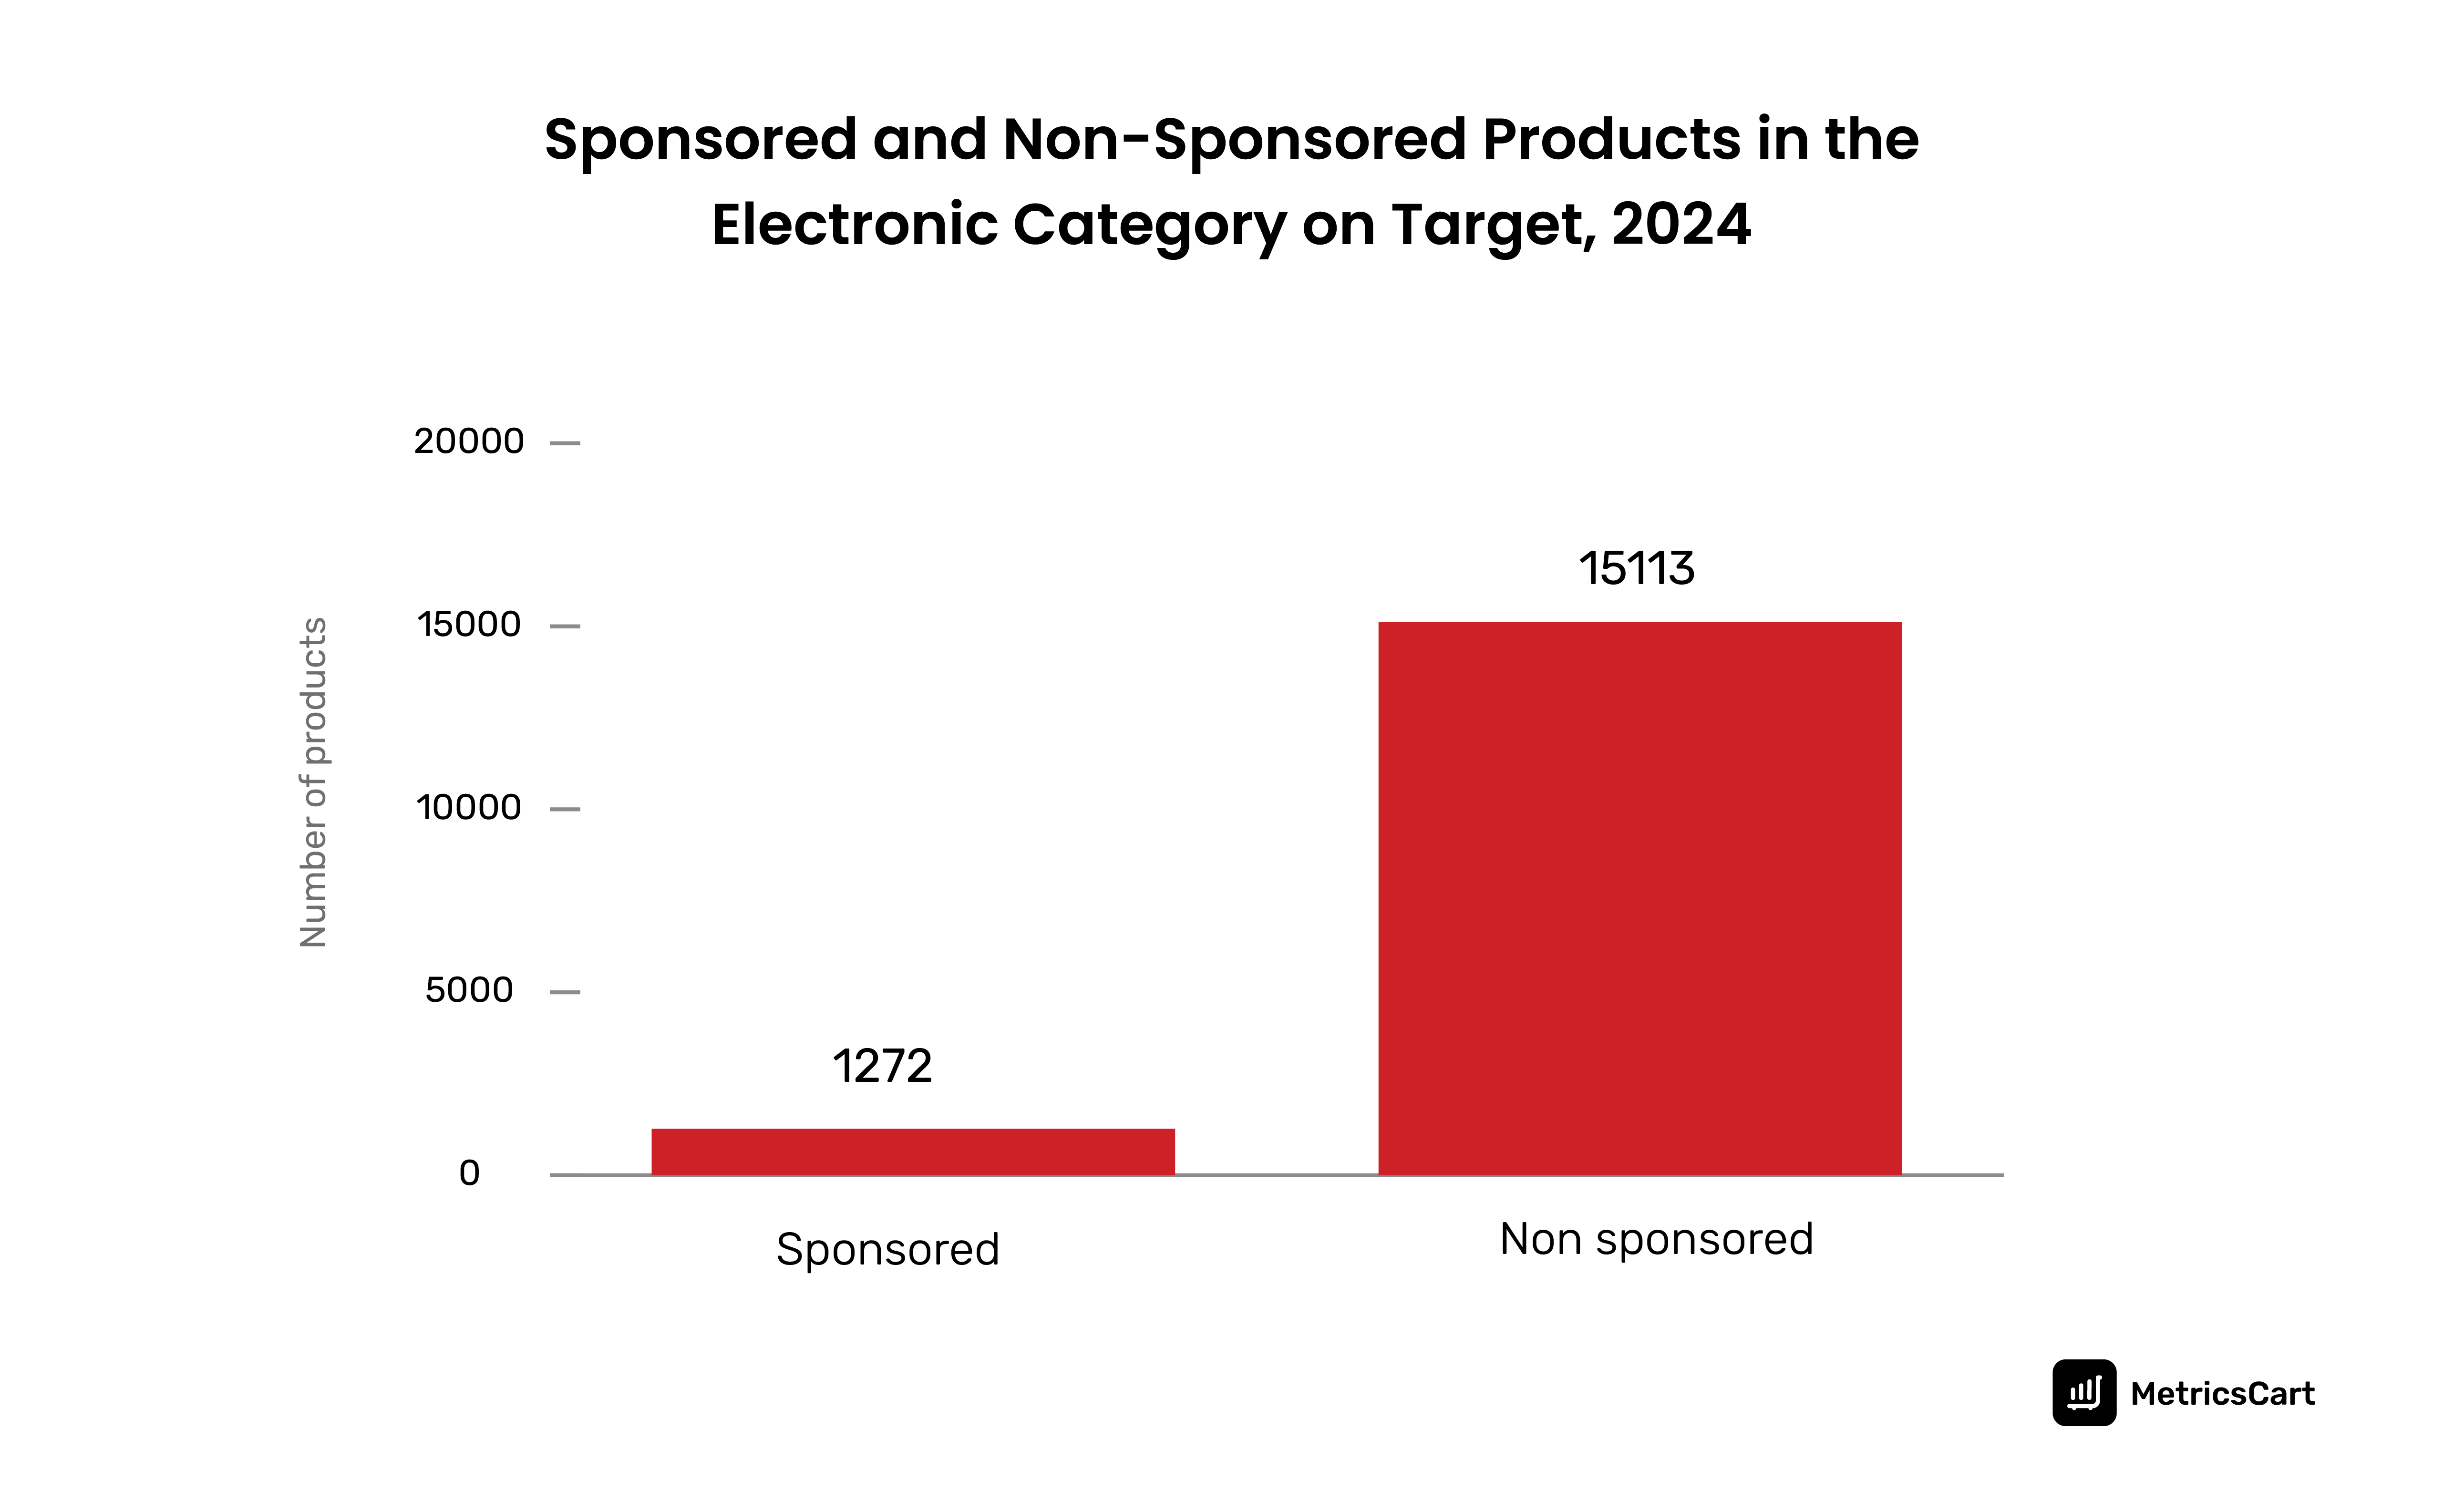 The graph shows 1272 sponsored items and 15113 non-sponsored electronic items on Target in 2024